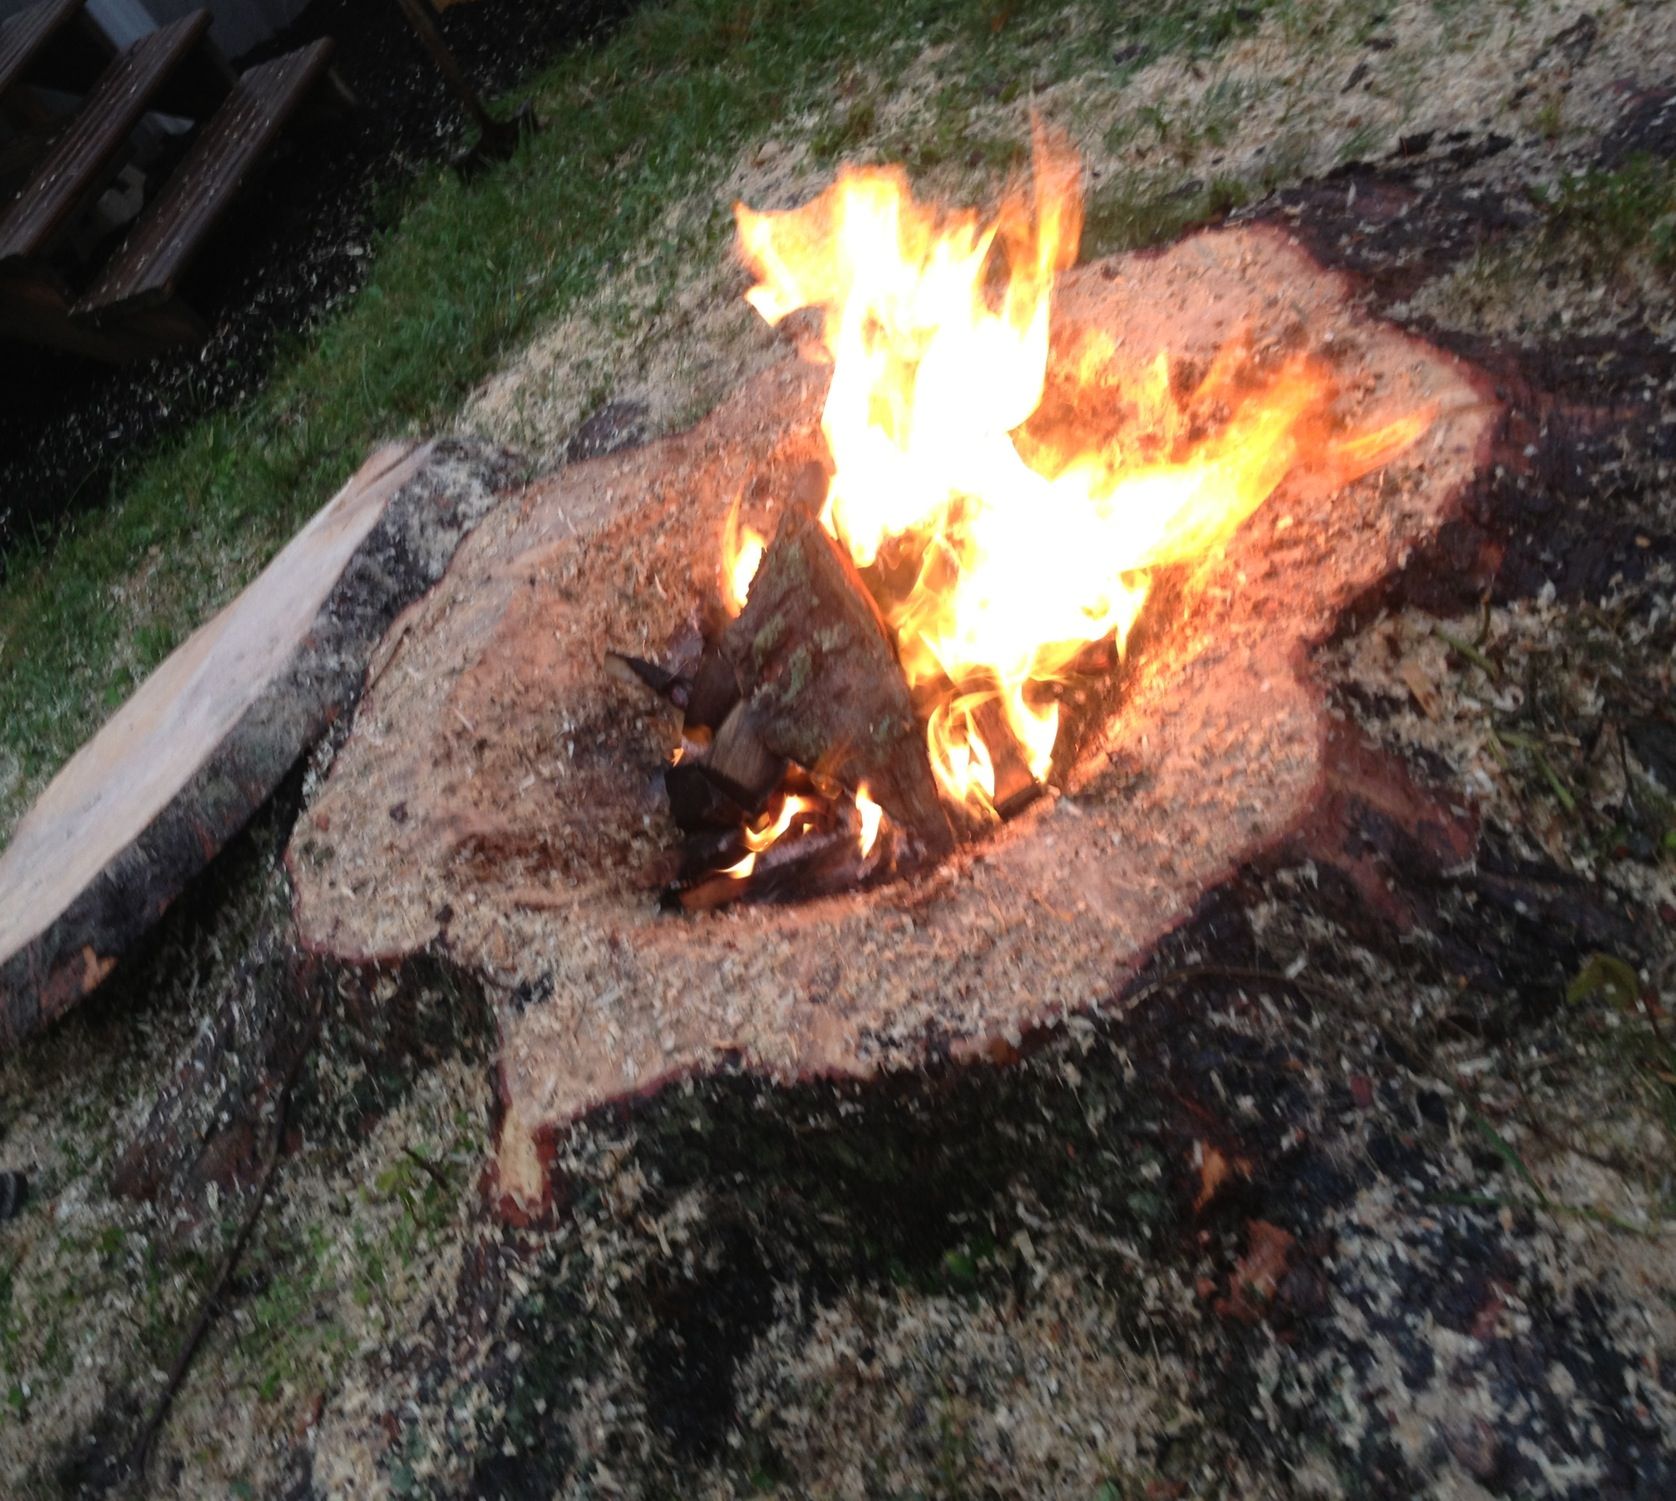 Fireplace ash Can Awesome Tree Stump Transformed Into An Awesome Fire Pit Plete